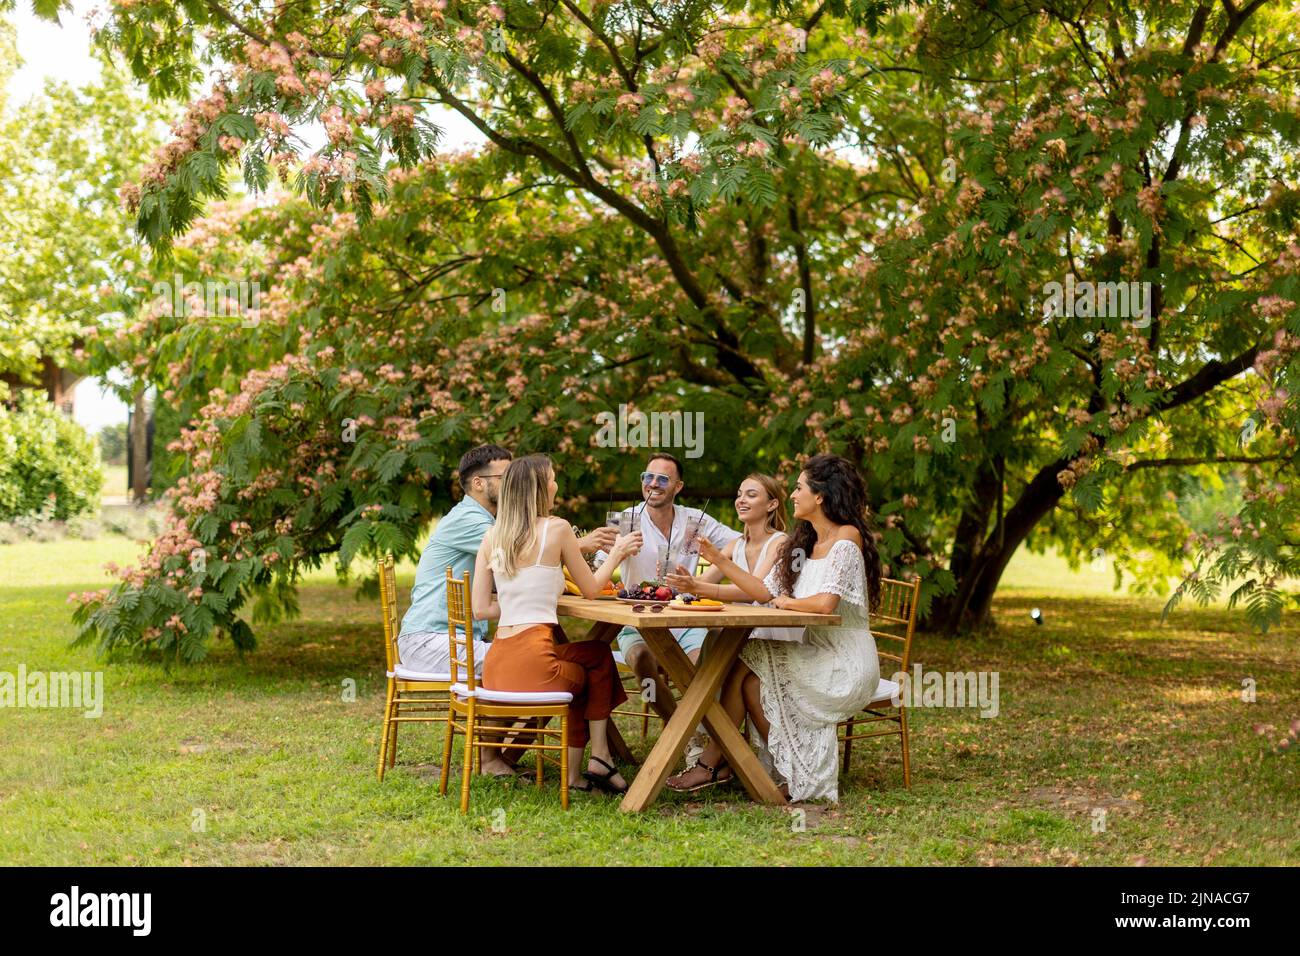 Group of young people cheering with fresh lemonade and eating fruits in the garden Stock Photo